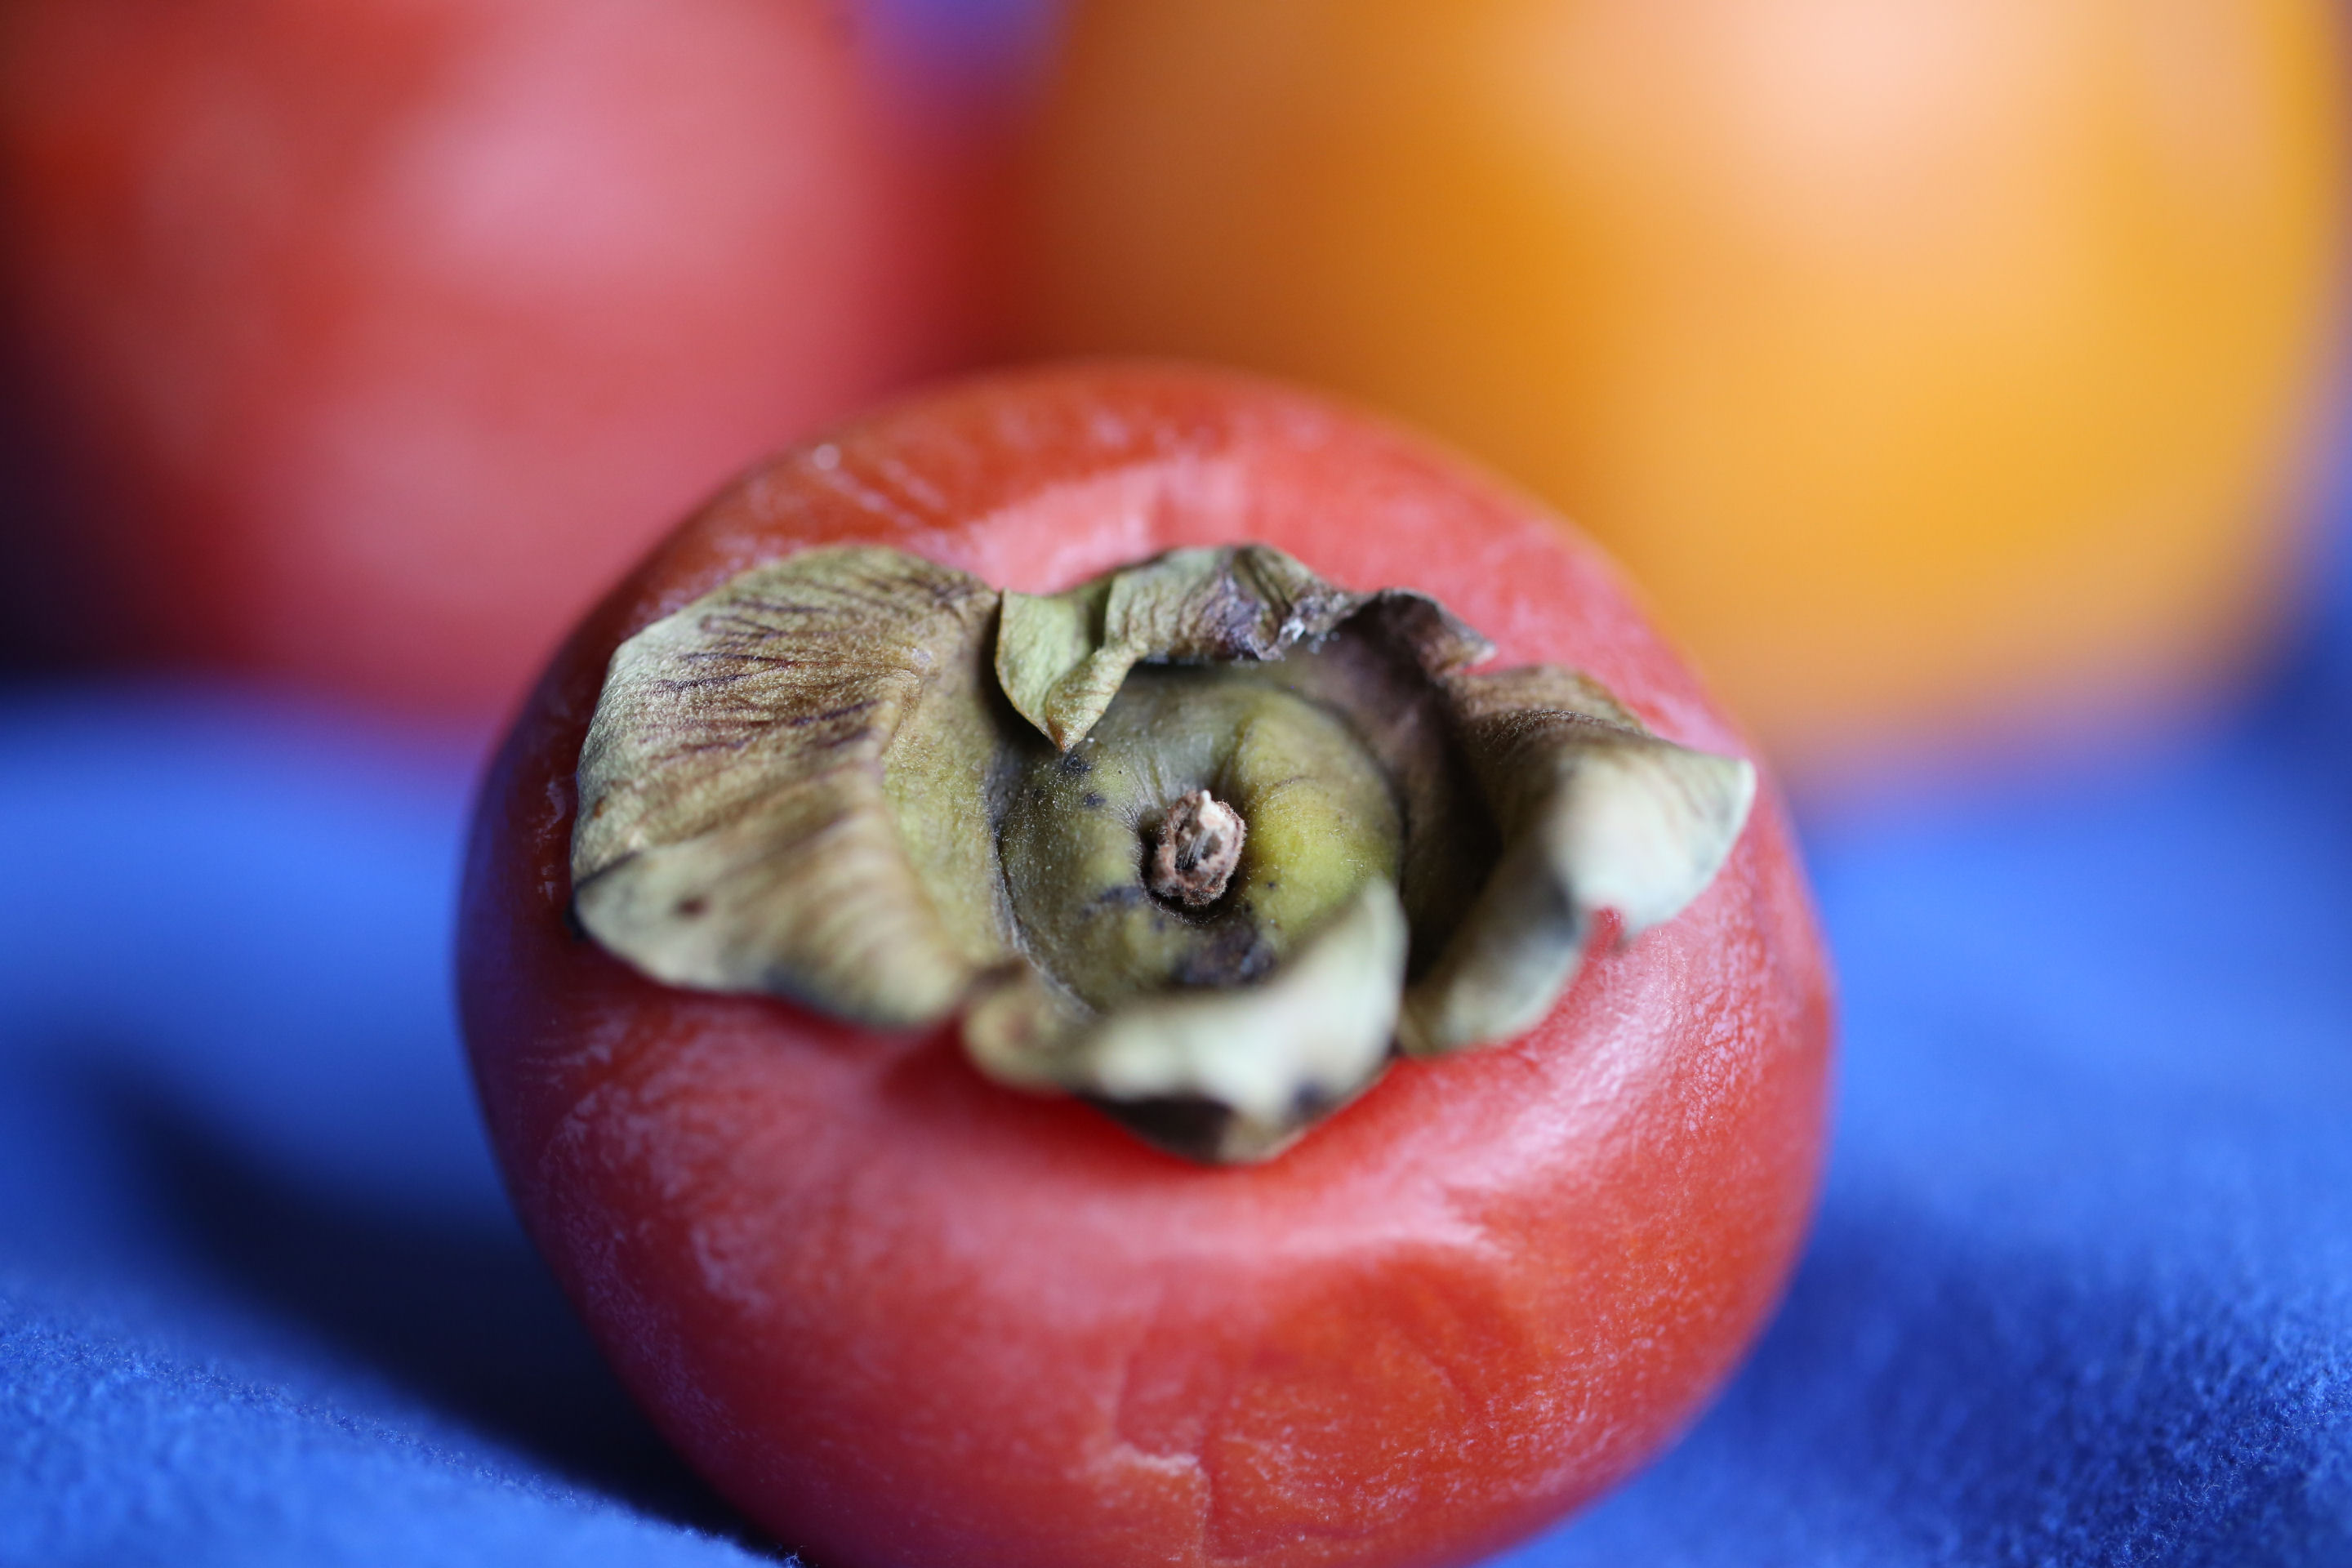 P for persimmon 